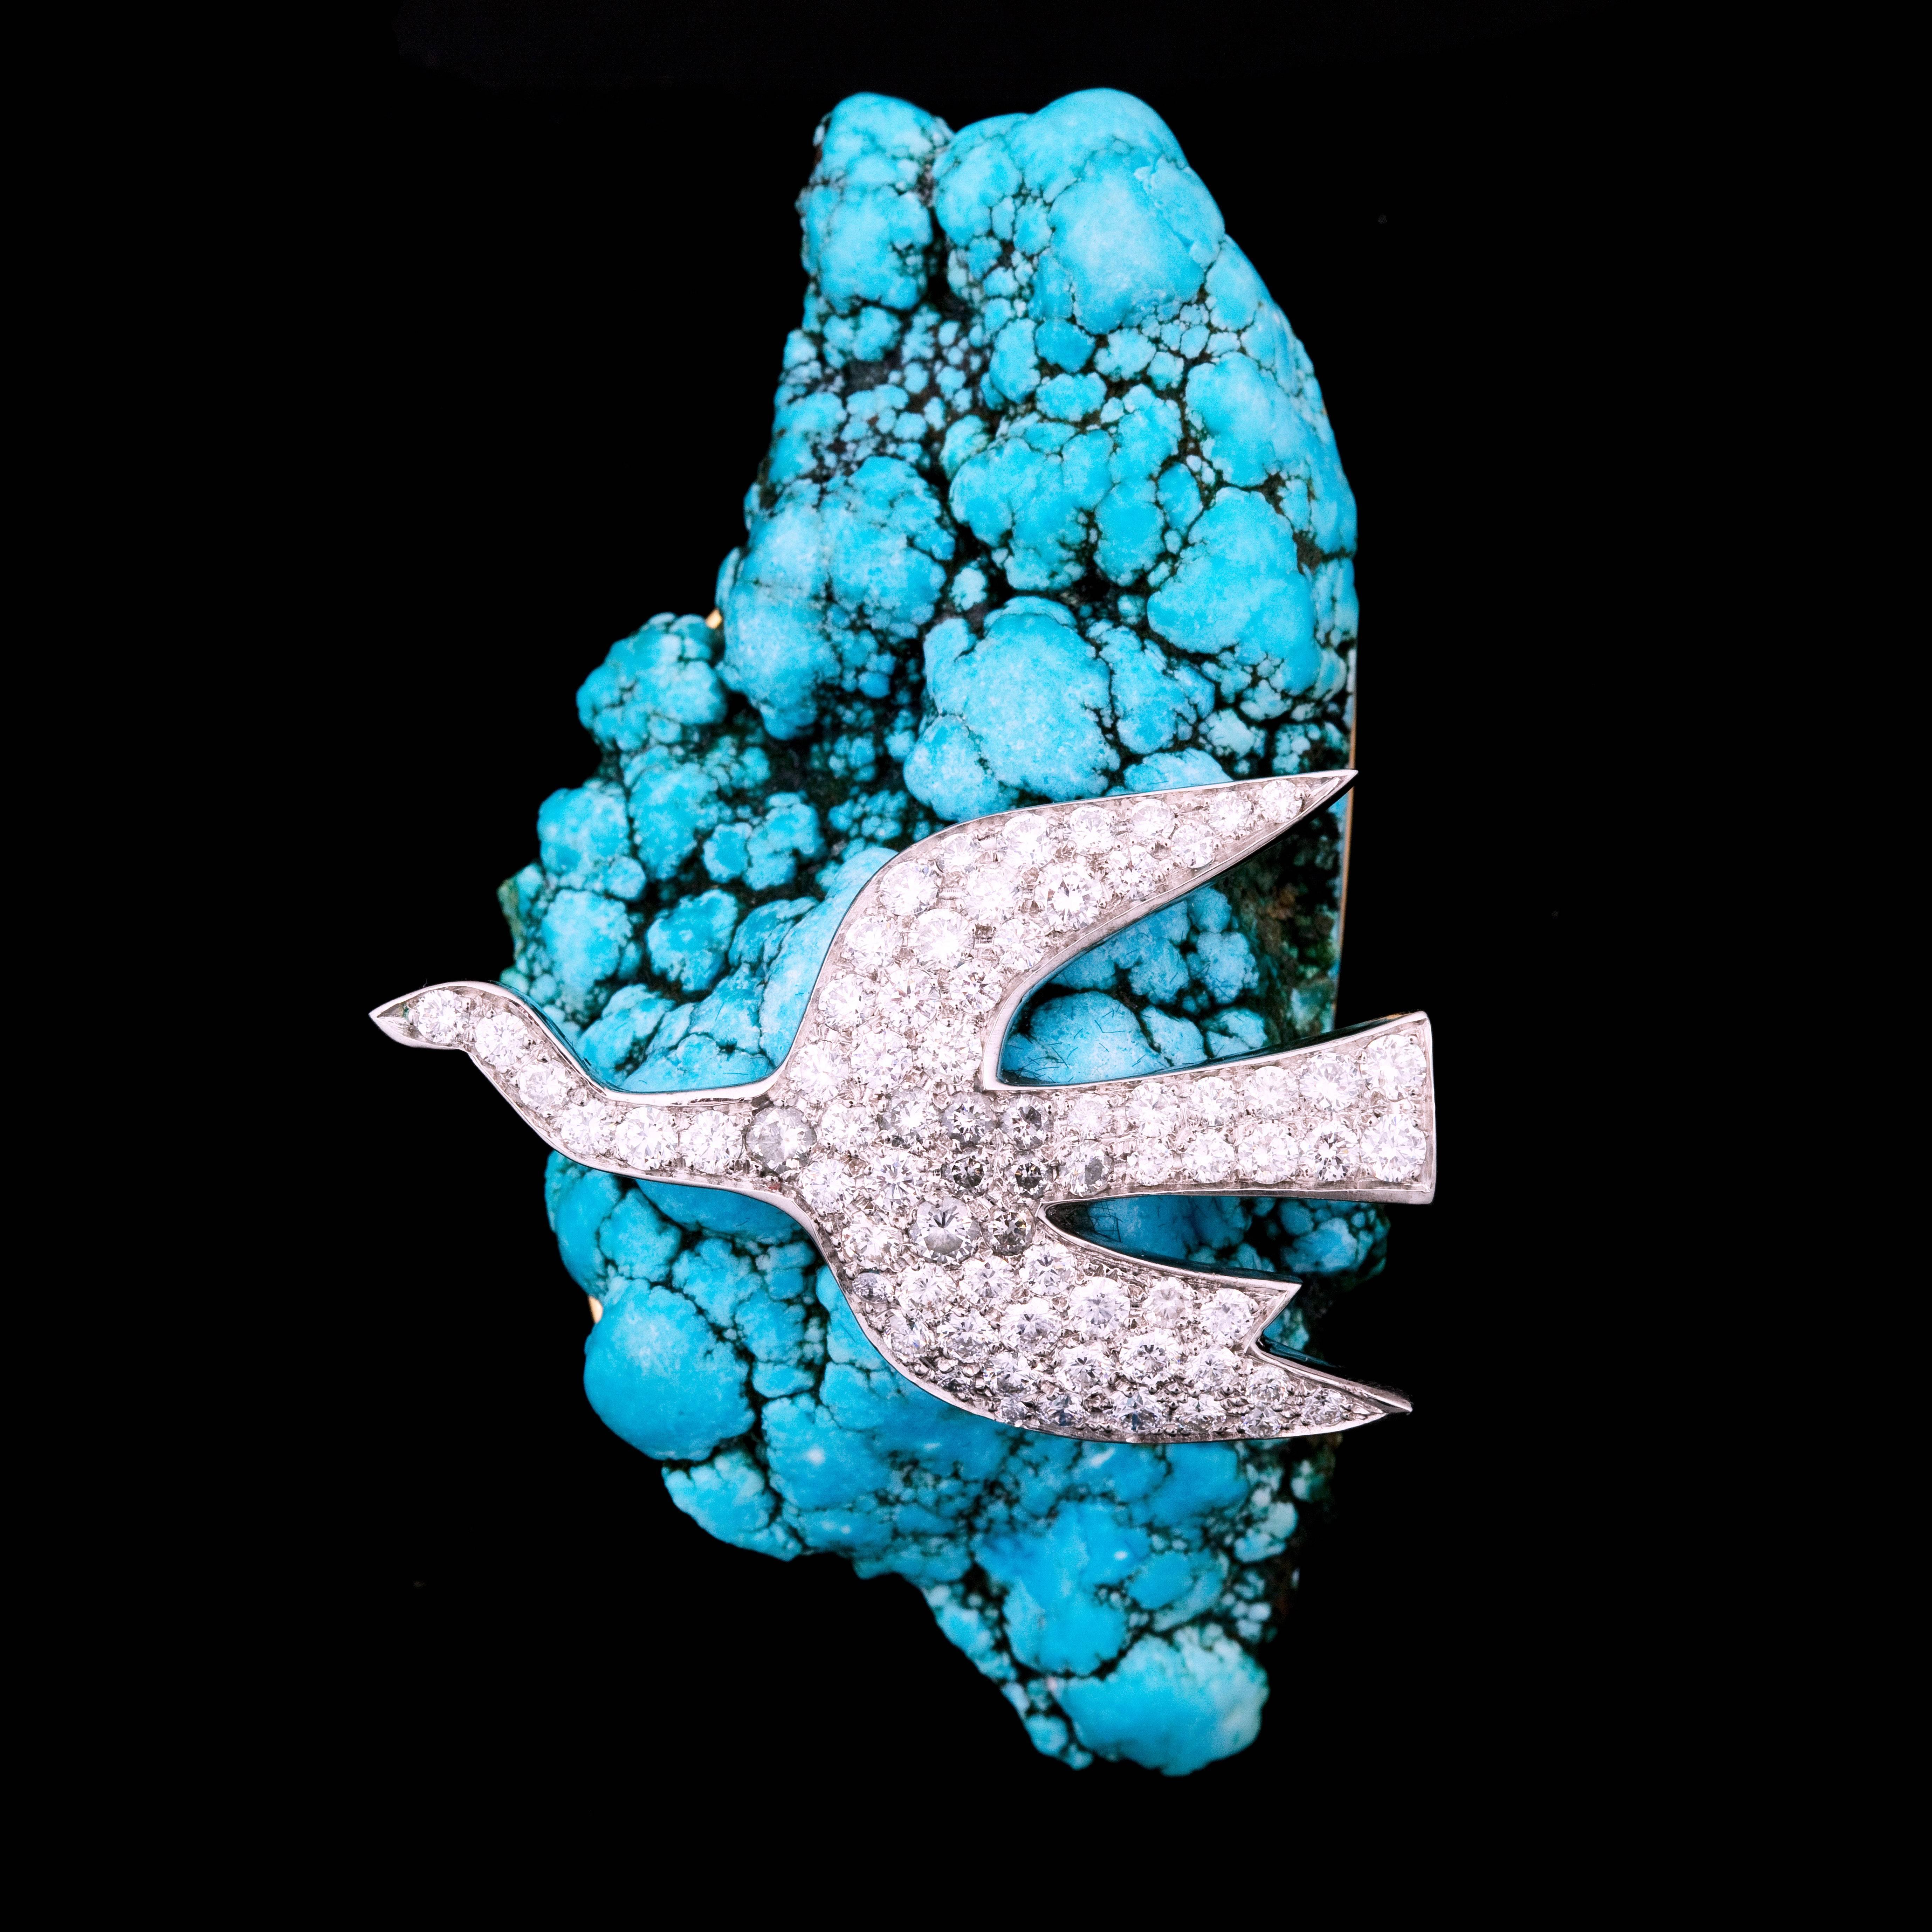 Express Shipping insured during the Lockdown

Rare Turquoise, Platinium  and Roundcut Diamonds brooch by Georges Braque (1882-1963), inventor of cubism. The attach is in gold.
The Brooch is Signed 